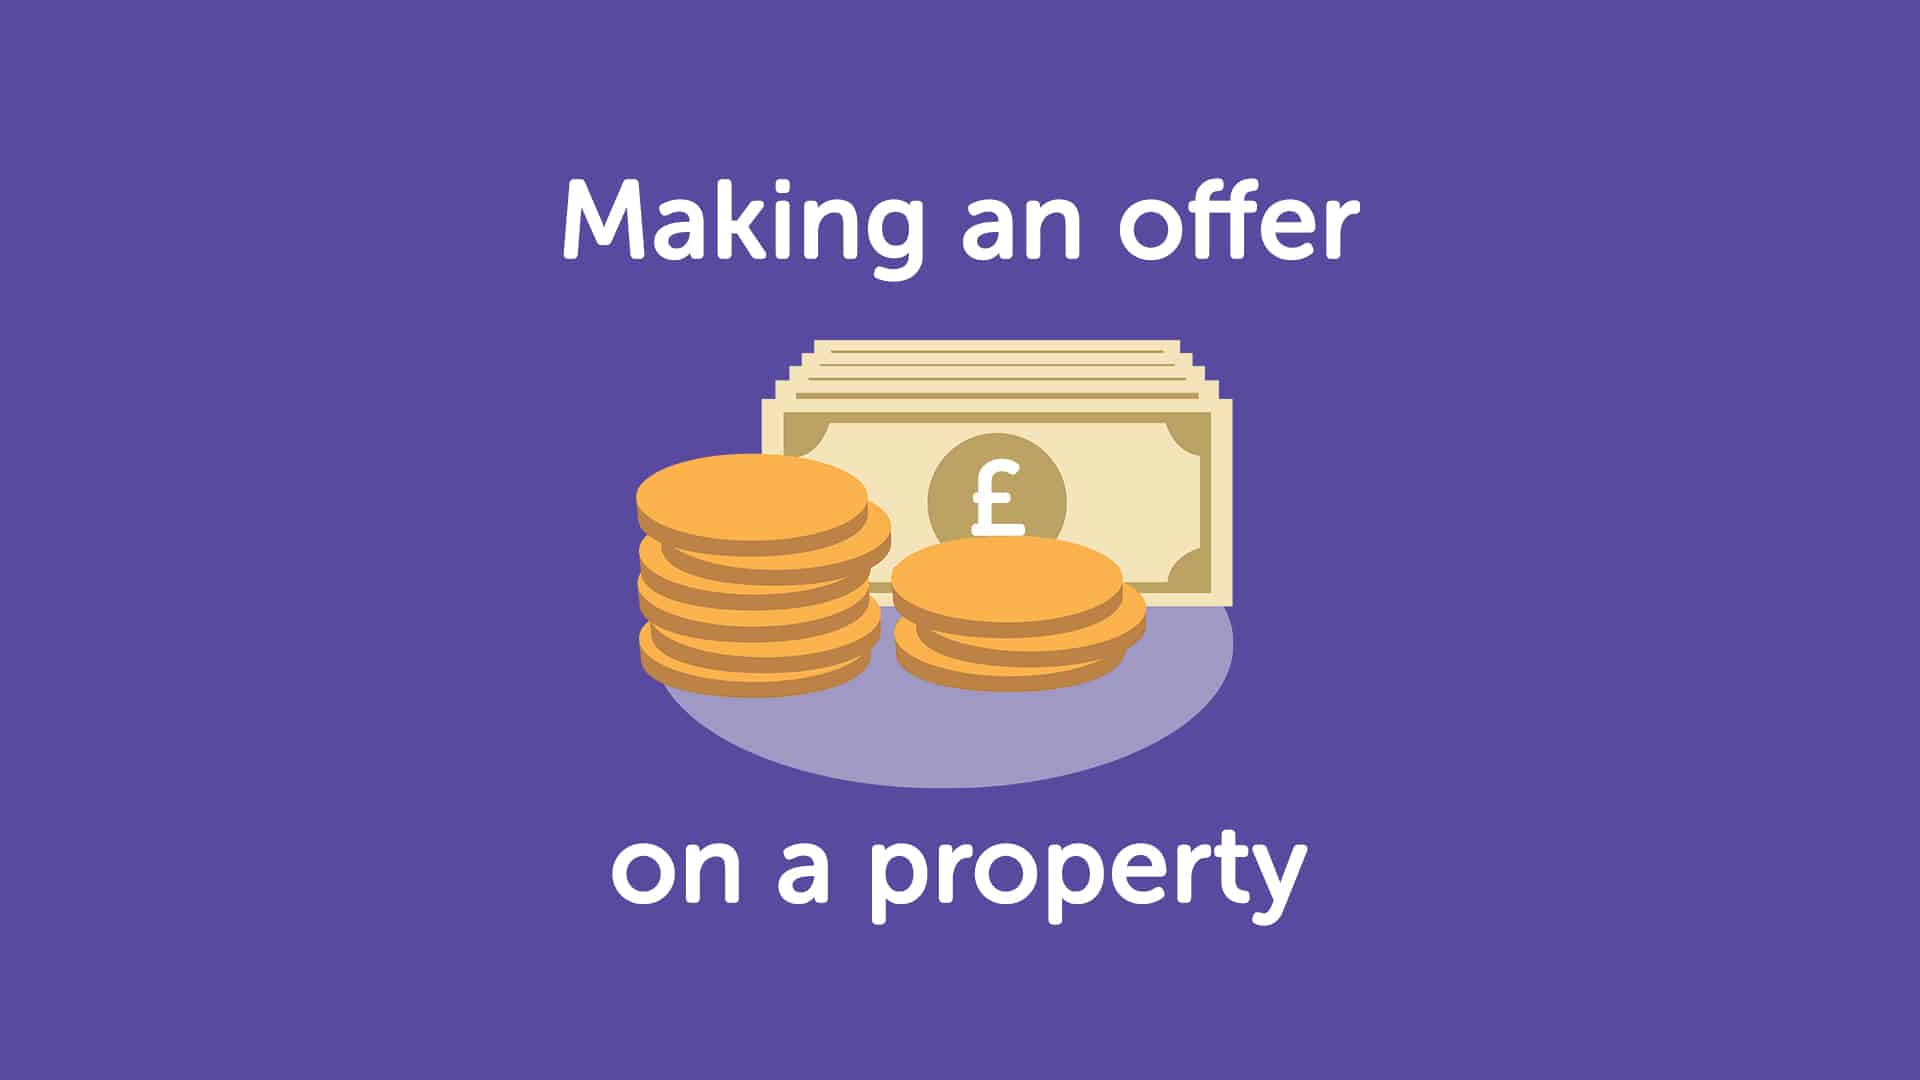 How to Make an Offer on a Property in Doncaster?